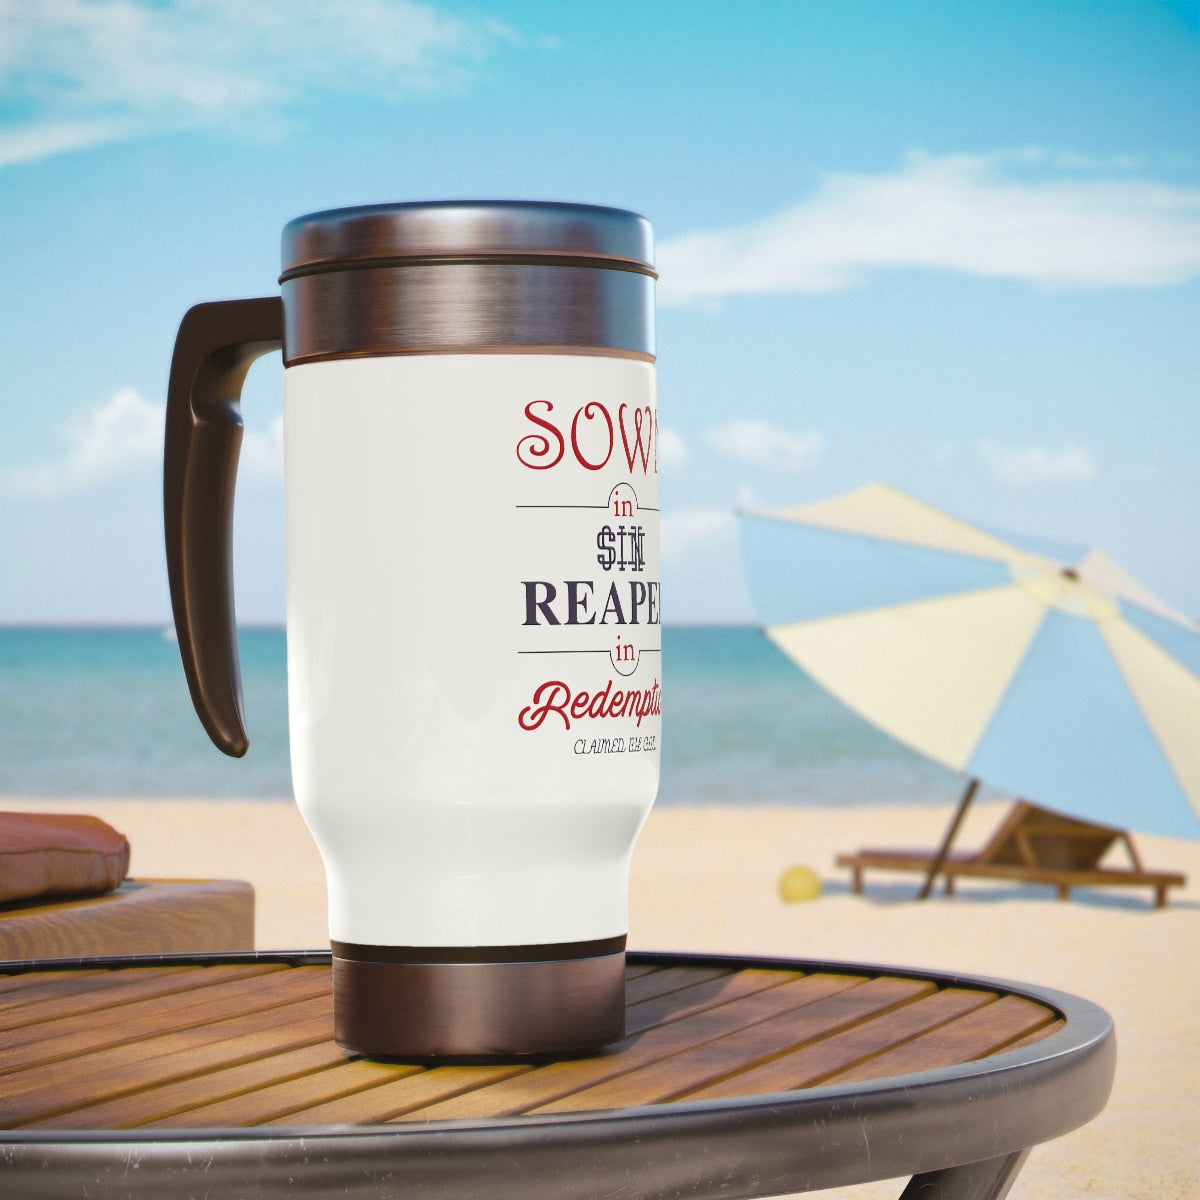 Sown in Sin Reaped in Redemption Stainless Steel Travel Mug with Handle, 14oz Printify